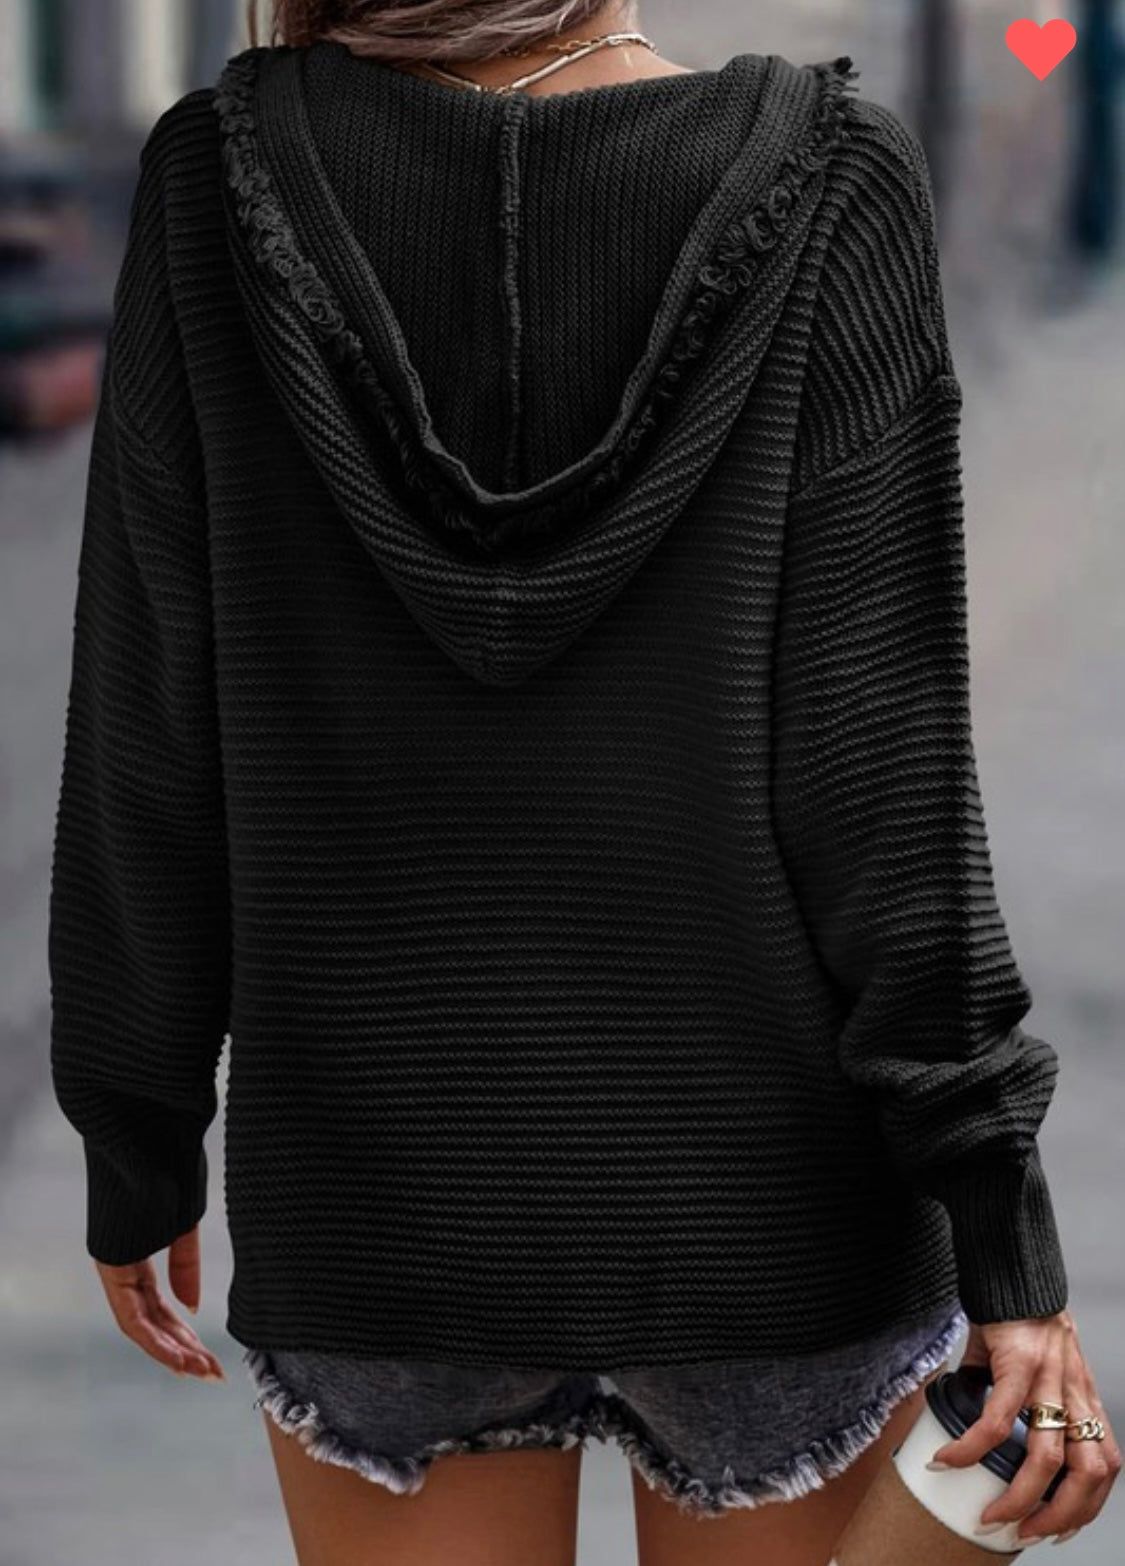 Hooded ribbed knit sweater